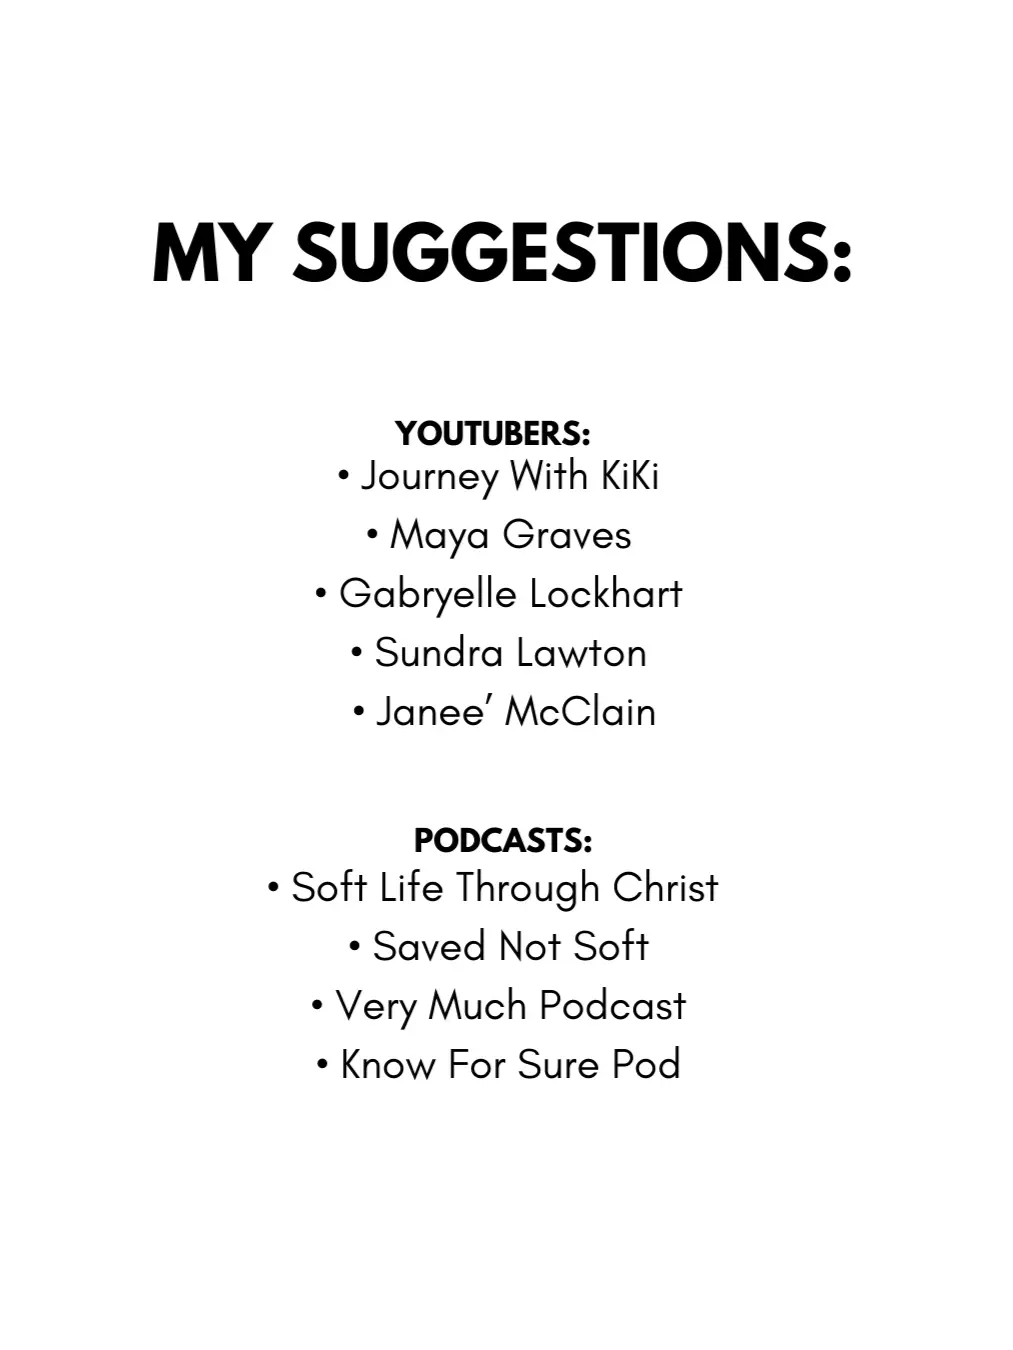  A list of suggested videos and podcasts